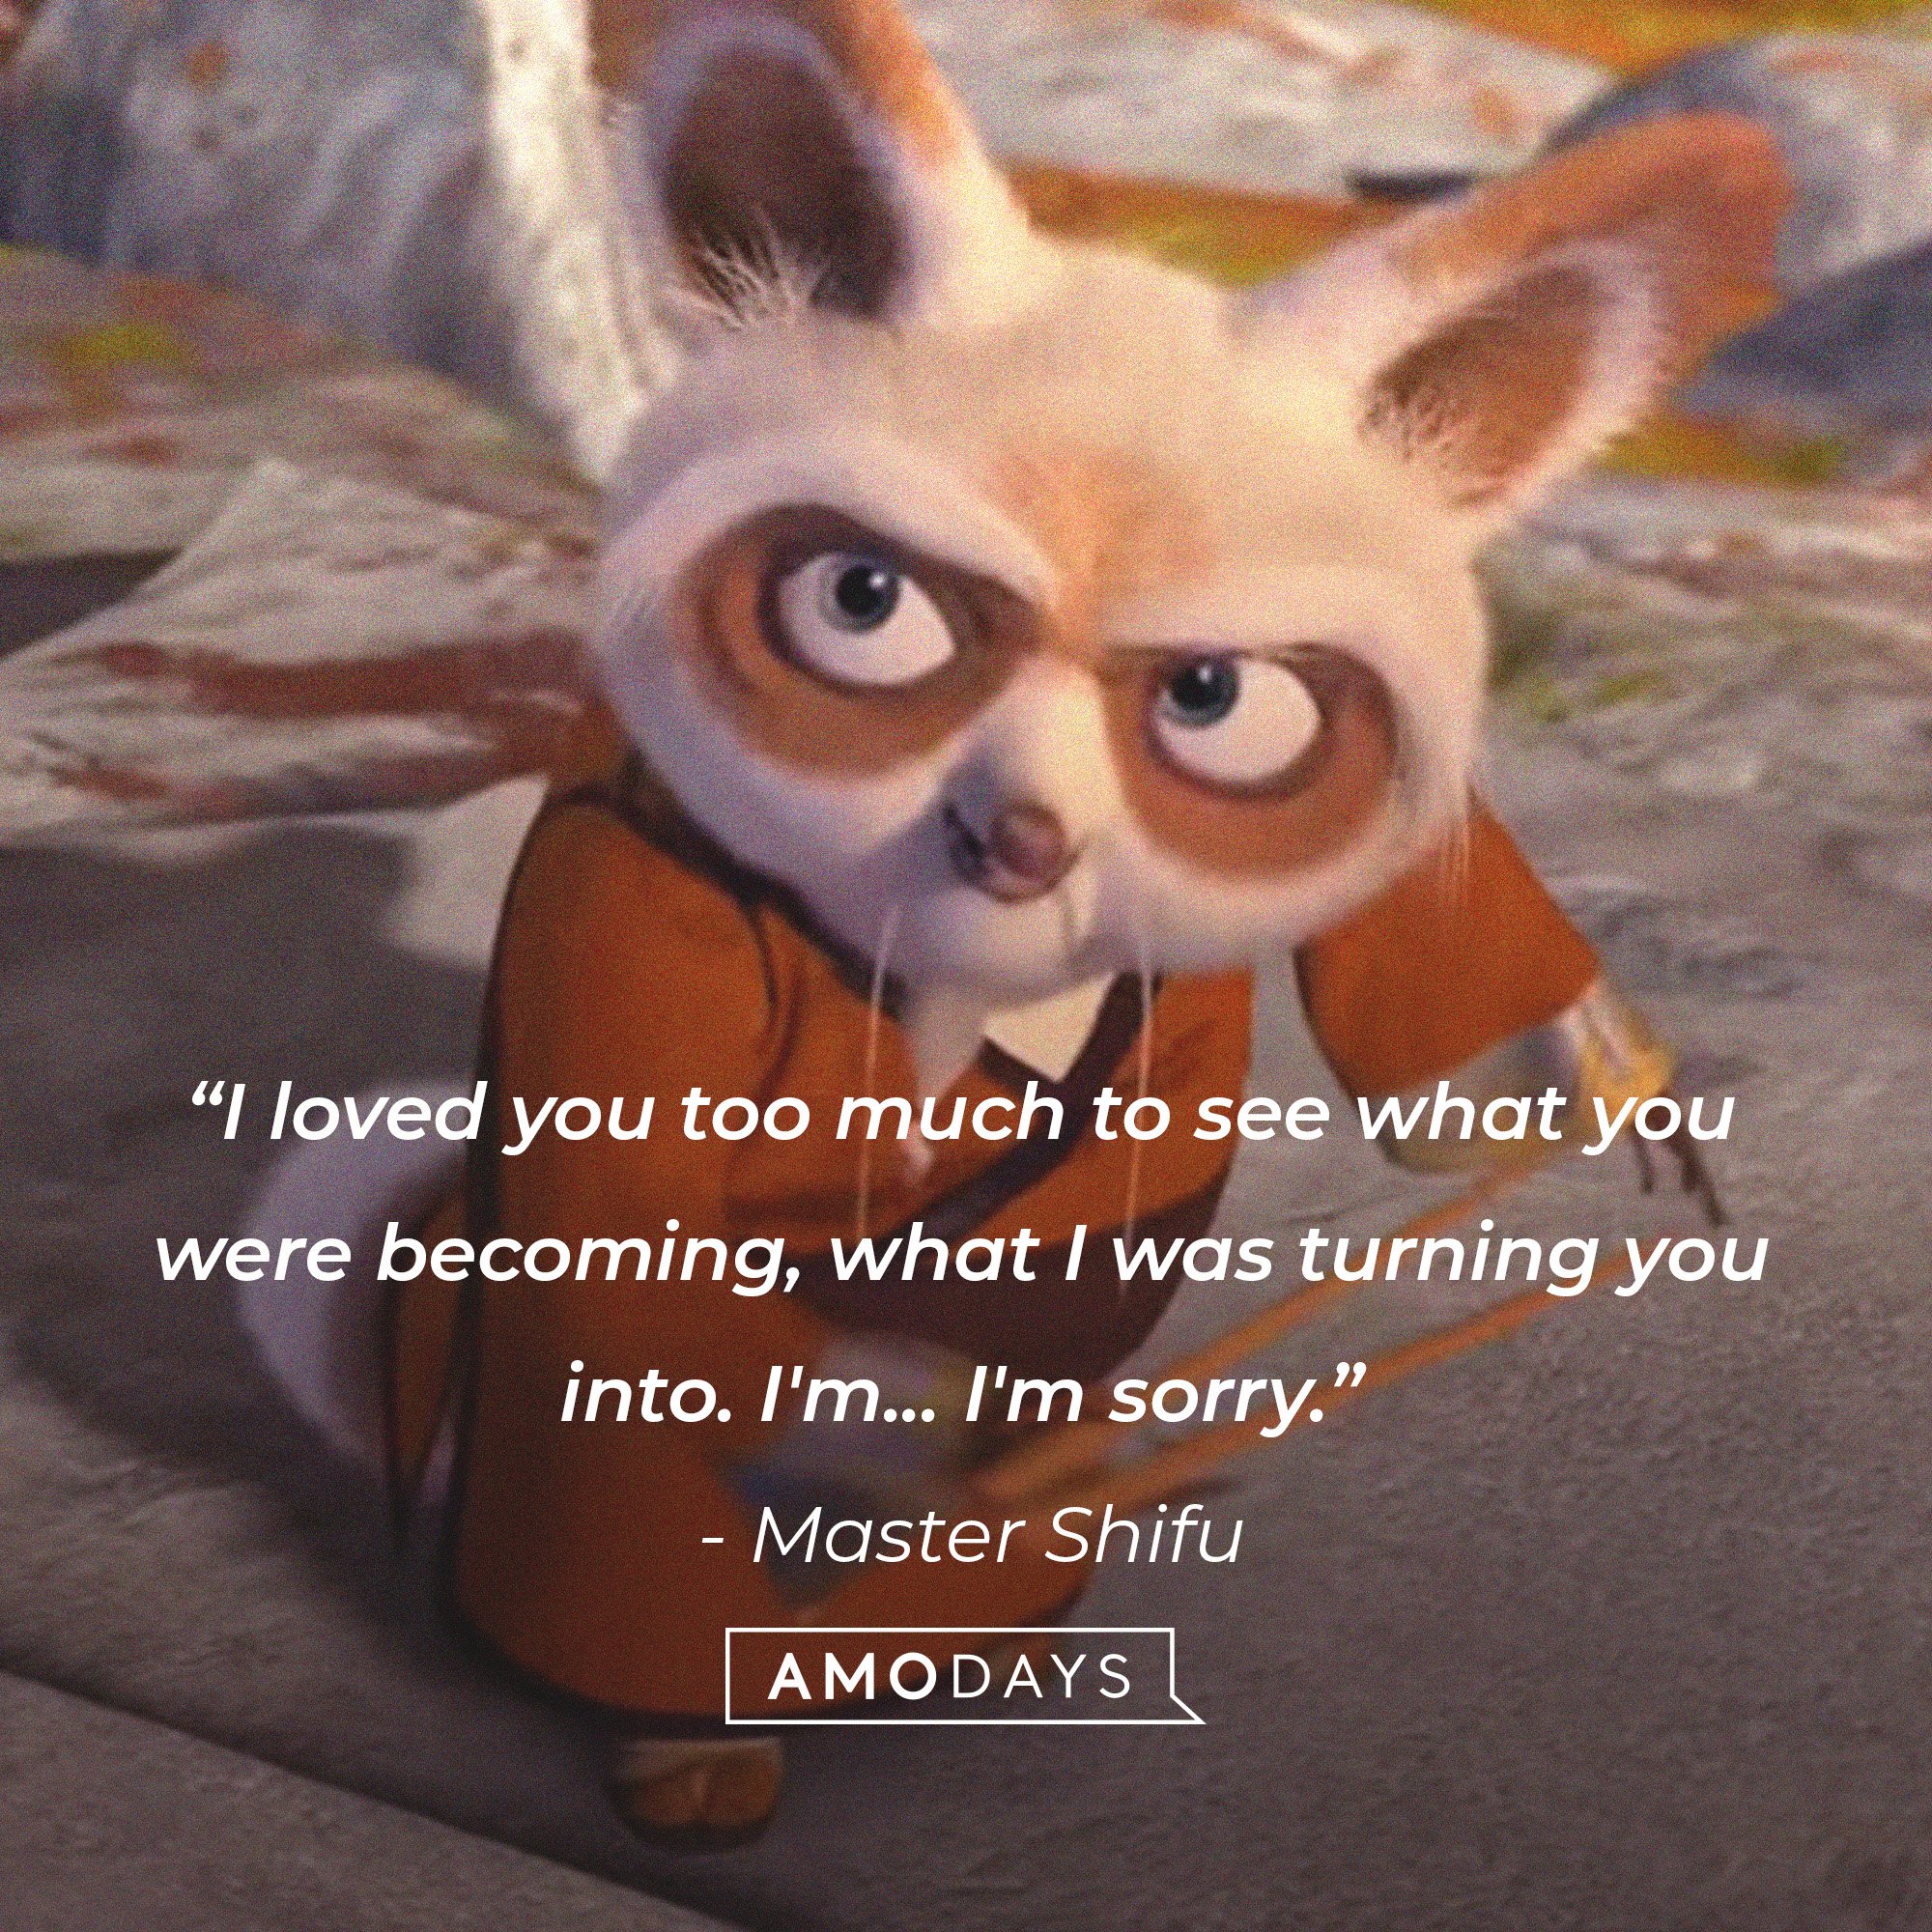  Master Shifu’s quote: ““I loved you too much to see what you were becoming, what I was turning you into. I'm... I'm sorry.”  | Image: AmoDays